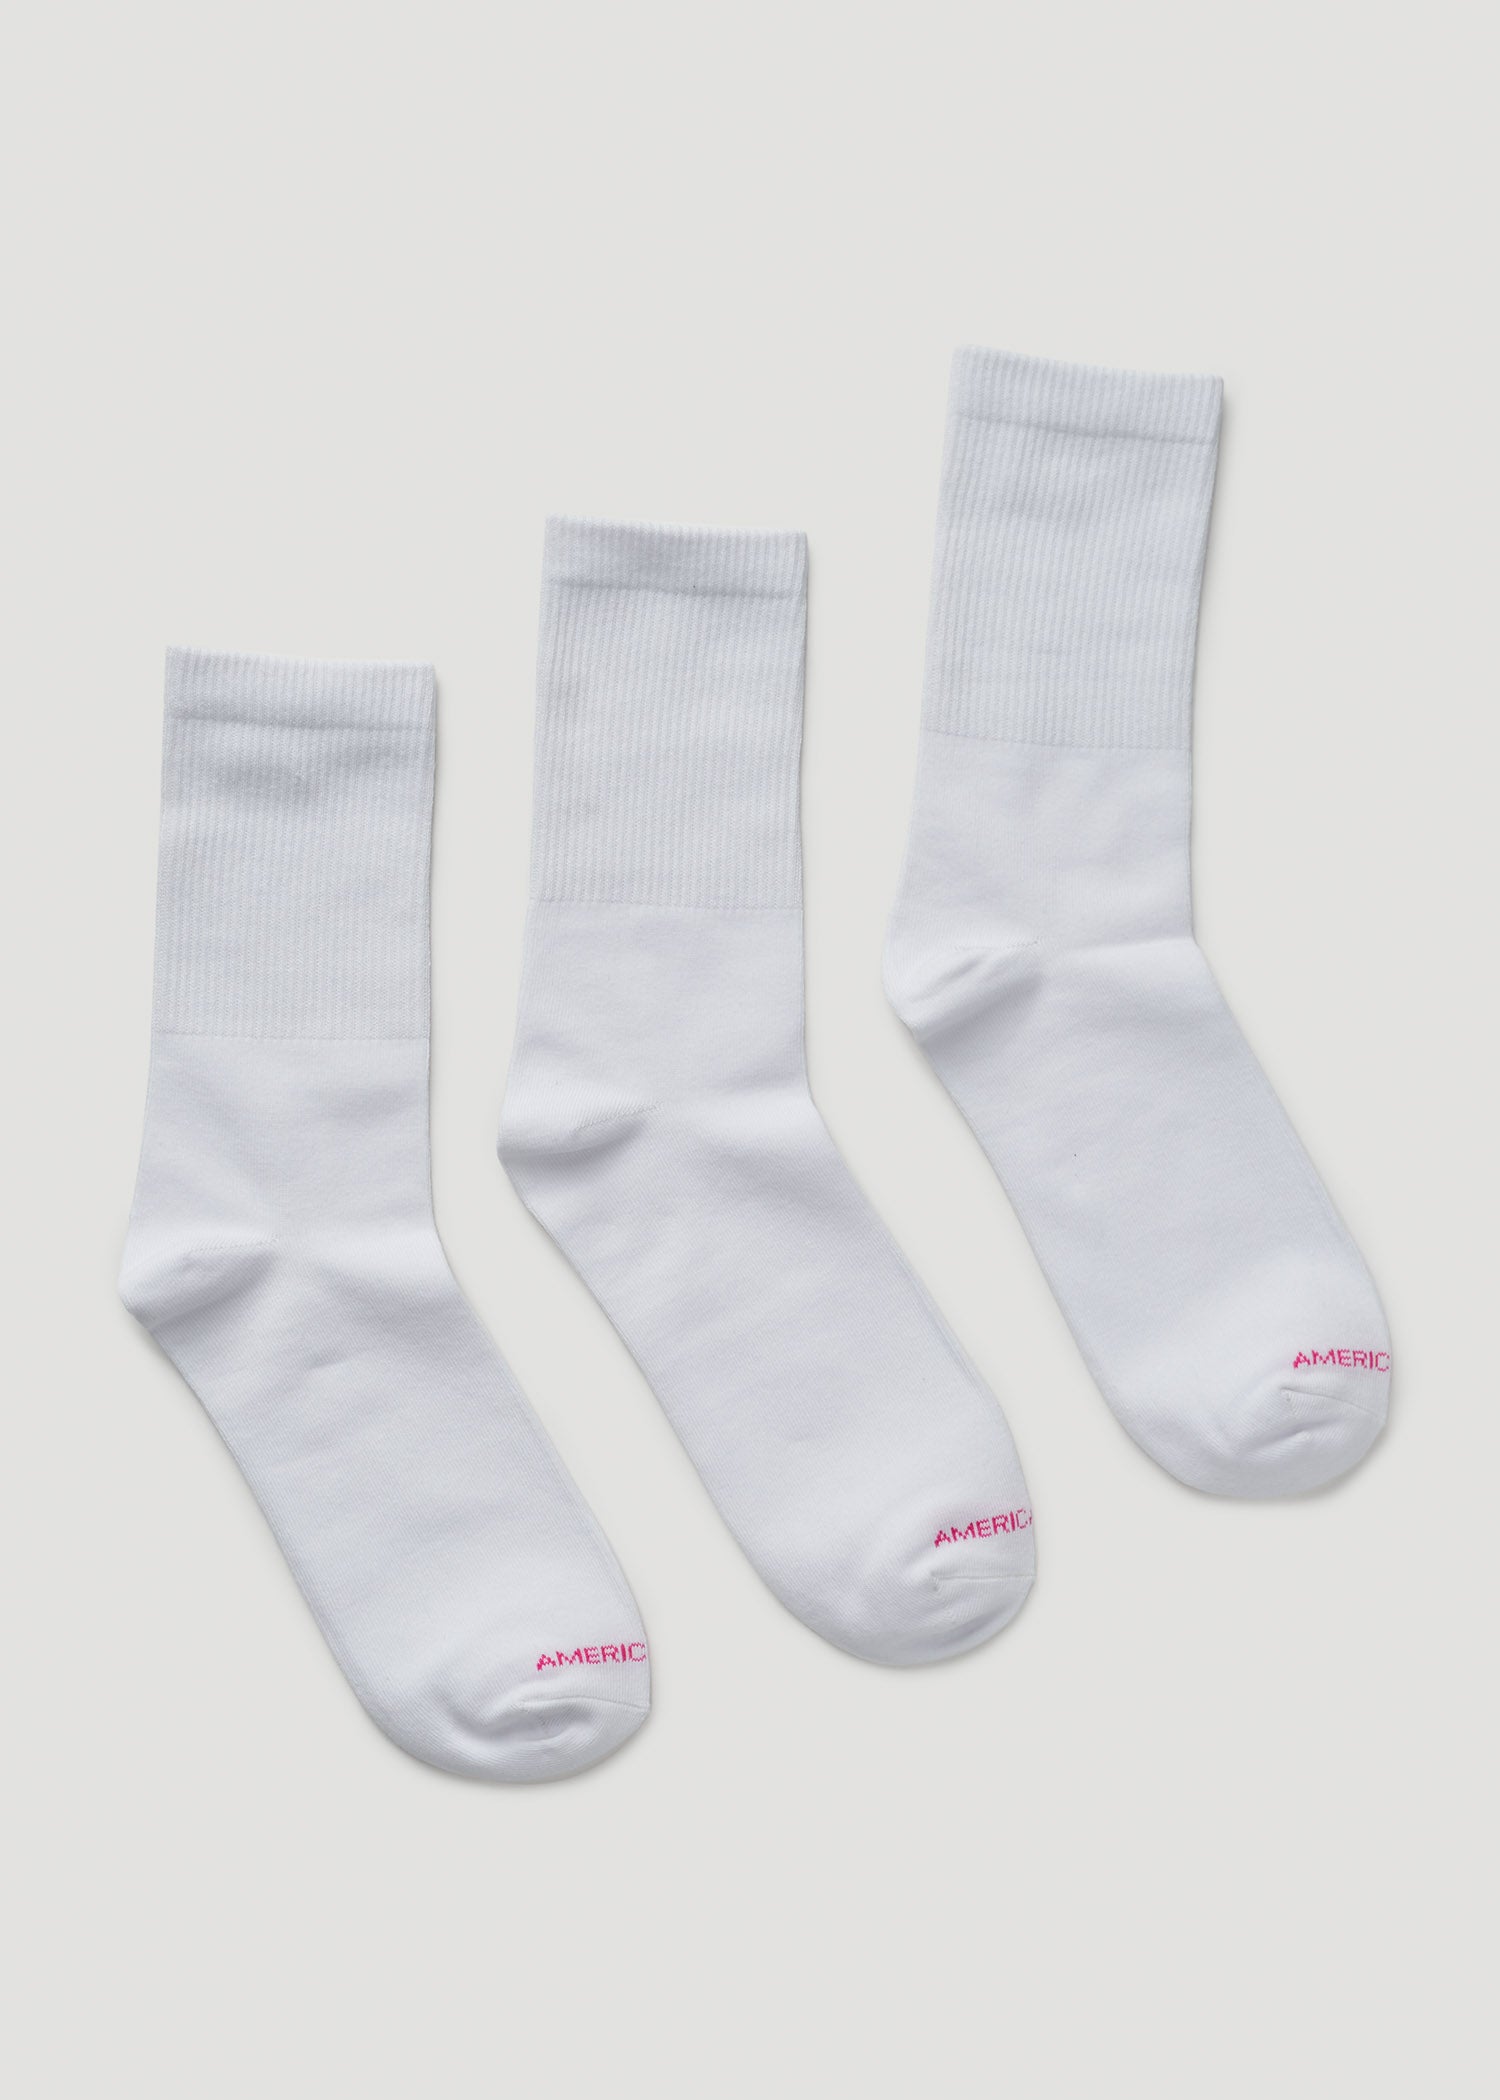 Crew socks 12 Pairs pack (Size 10-13 Adult)